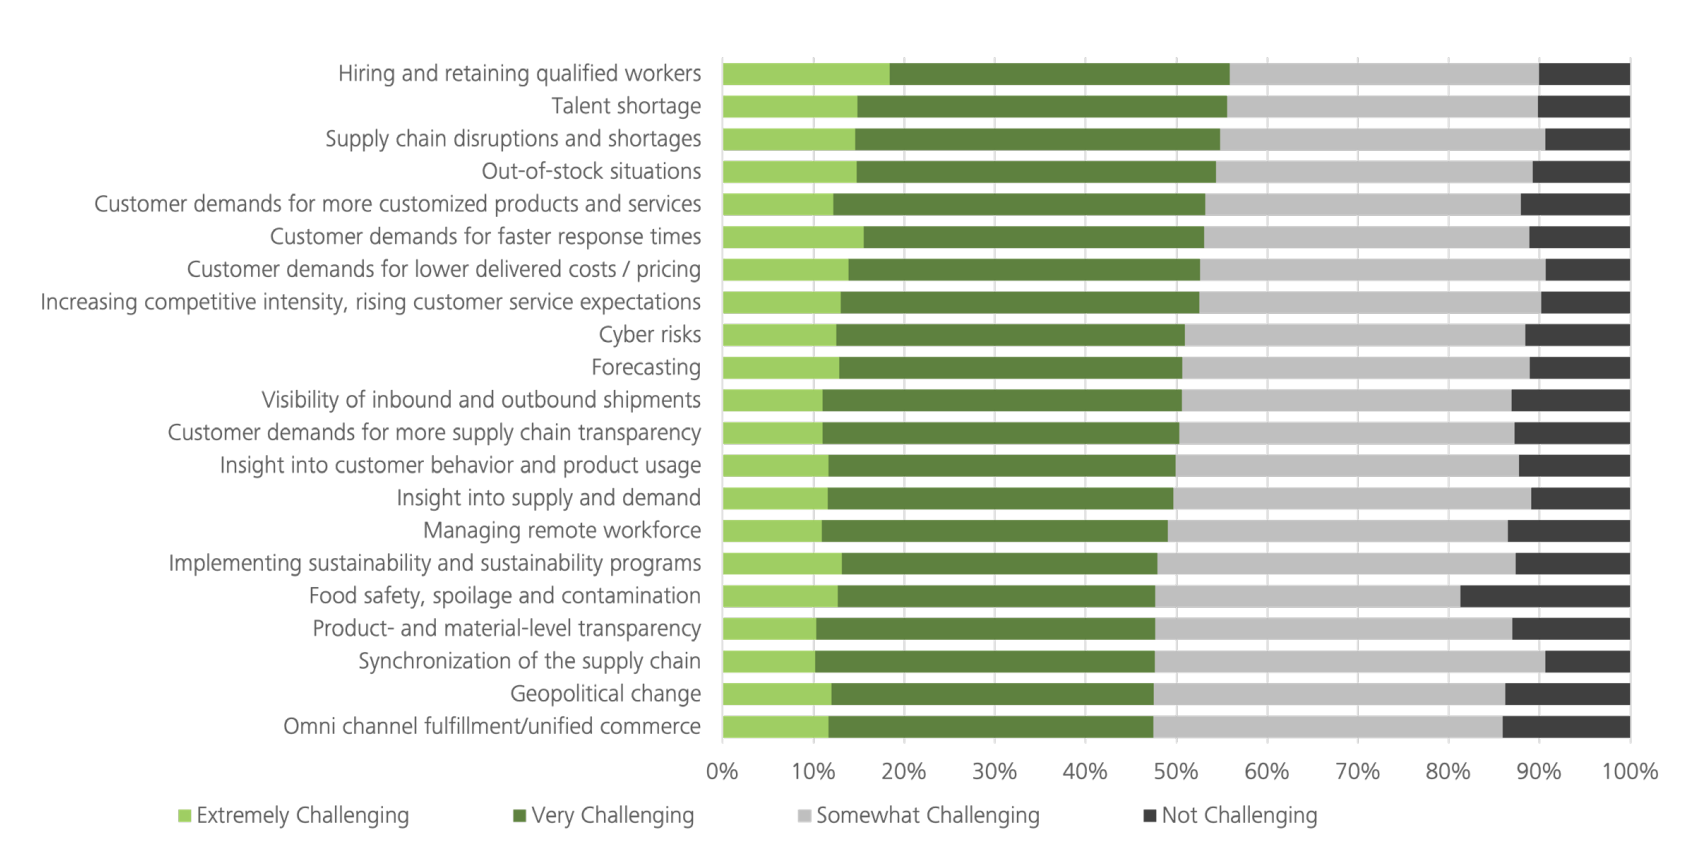 MHI’s 2023 Annual Industry Report lists “hiring and retaining qualified workers” and “talent shortage” as the top two company challenges.